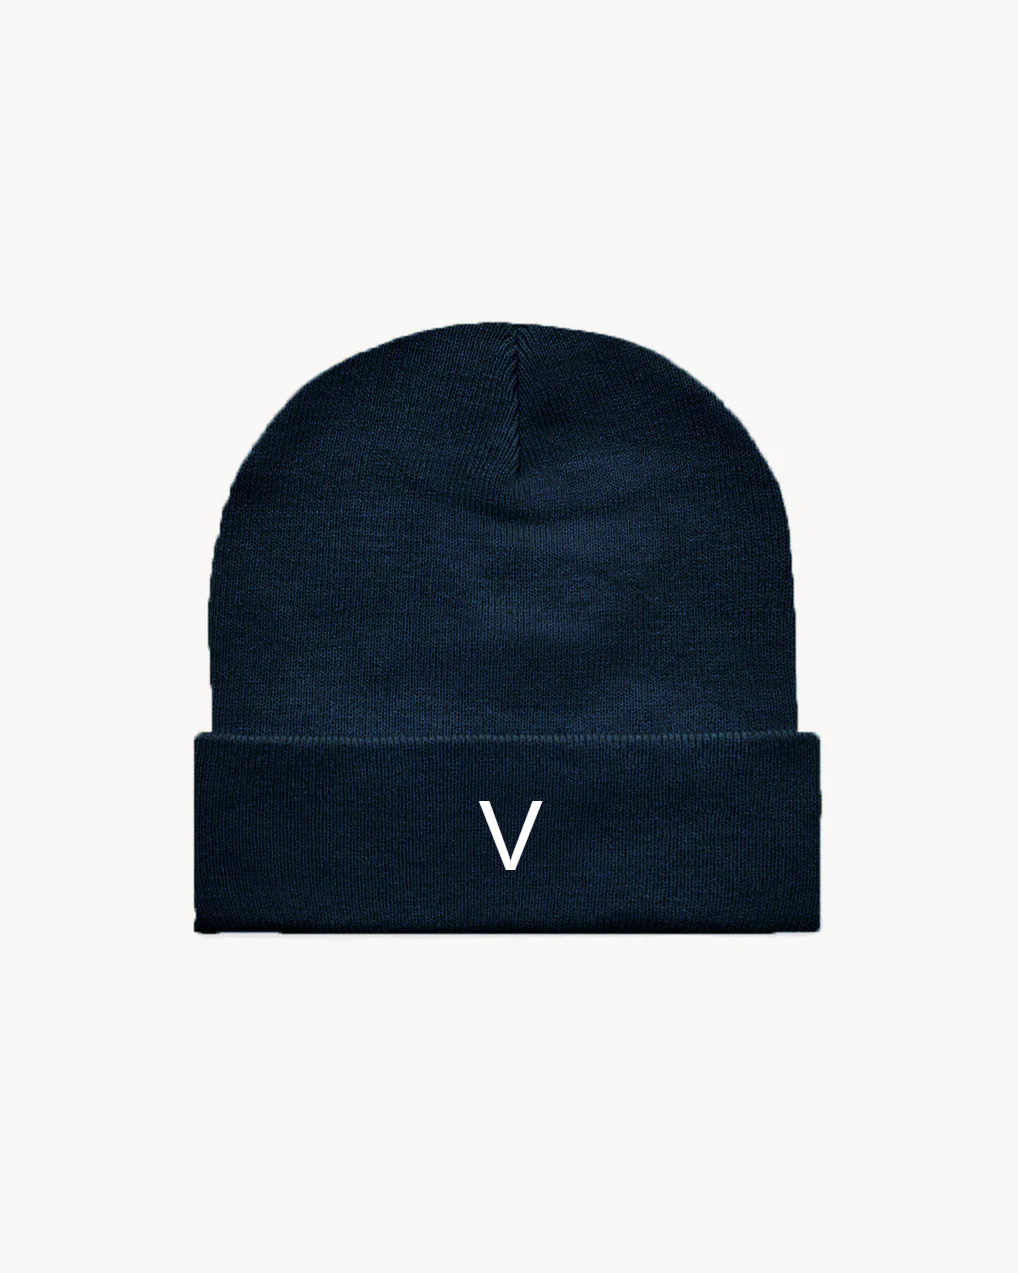 NAVY BLUE HAT | CUSTOM EMBROIDERY